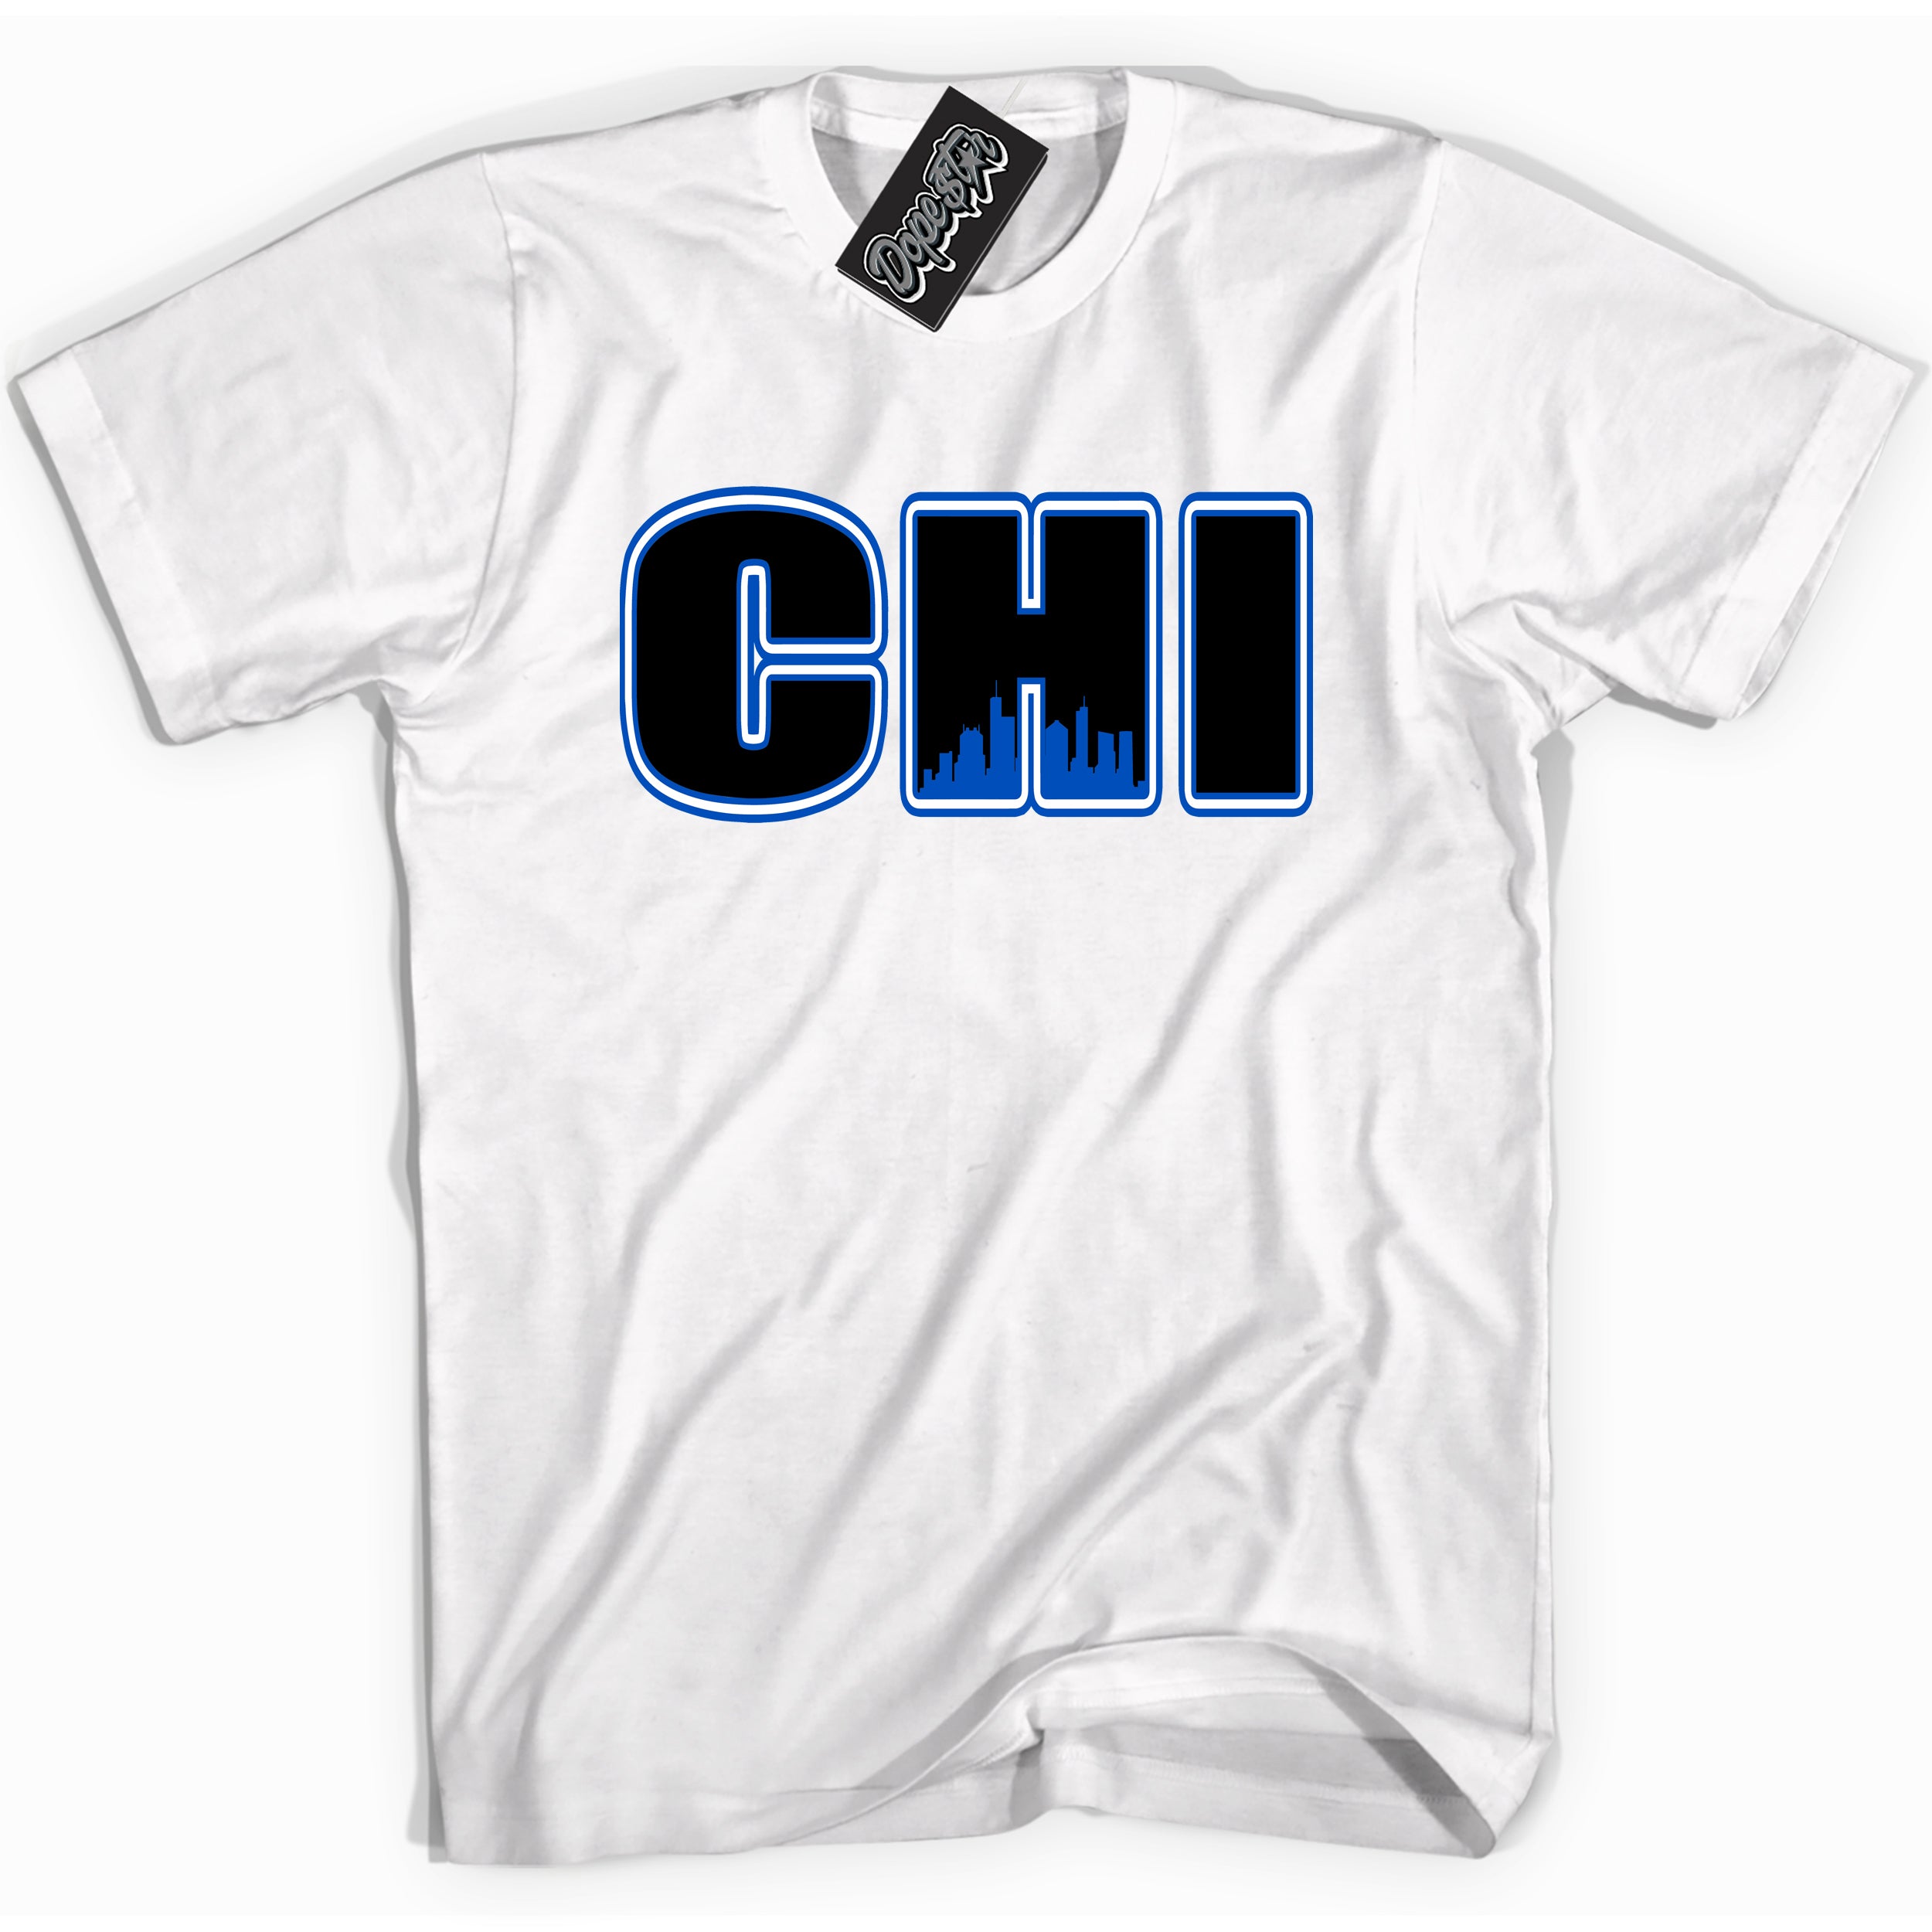 Cool White graphic tee with "Chicago" design, that perfectly matches Royal Reimagined 1s sneakers 